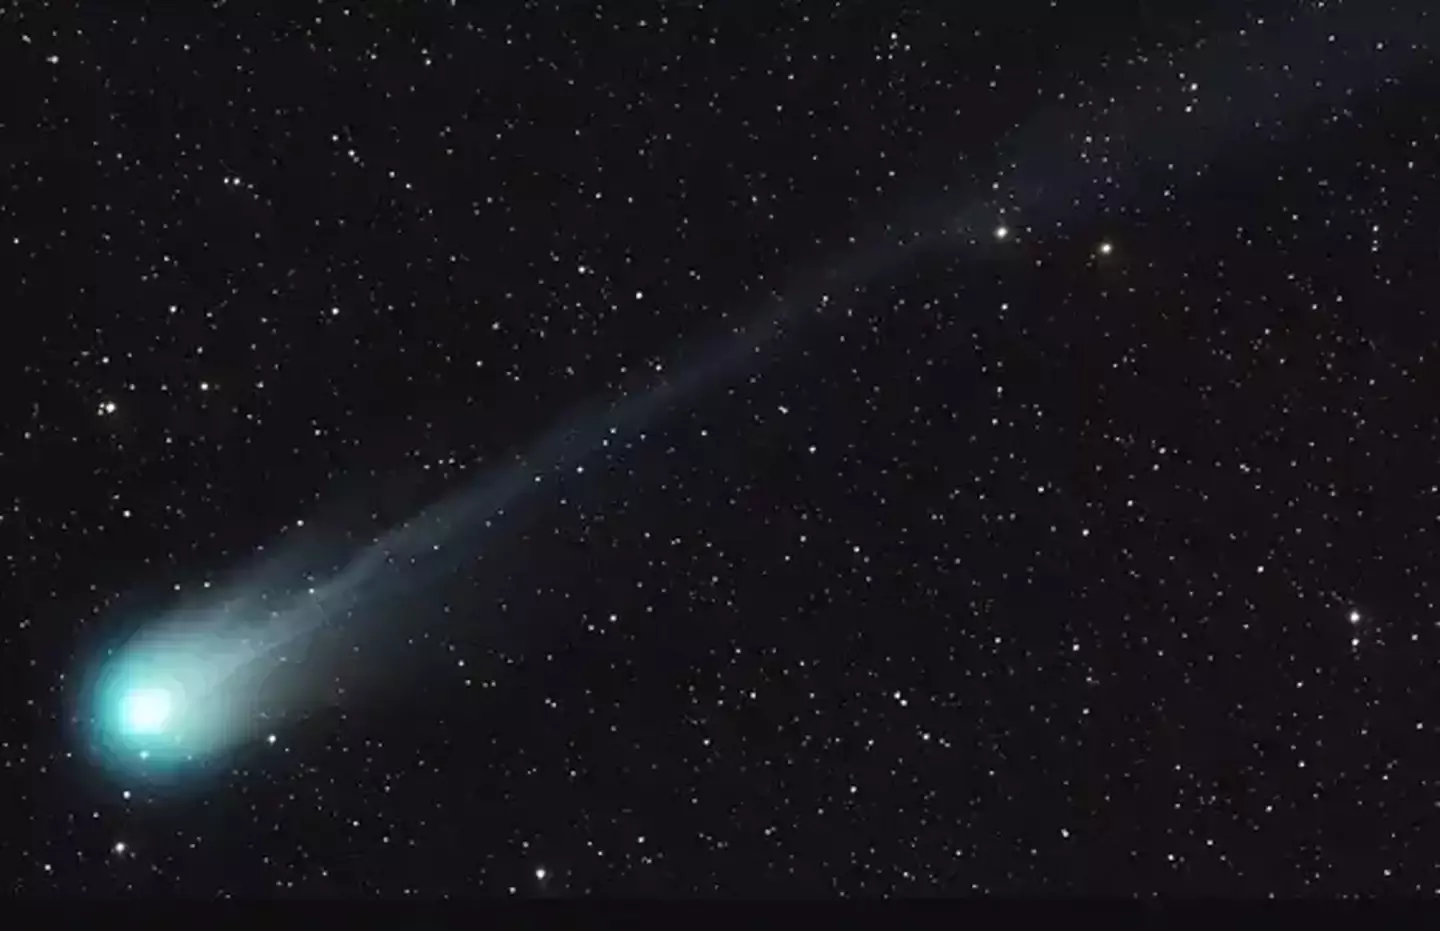 The Mother of Dragons comet.